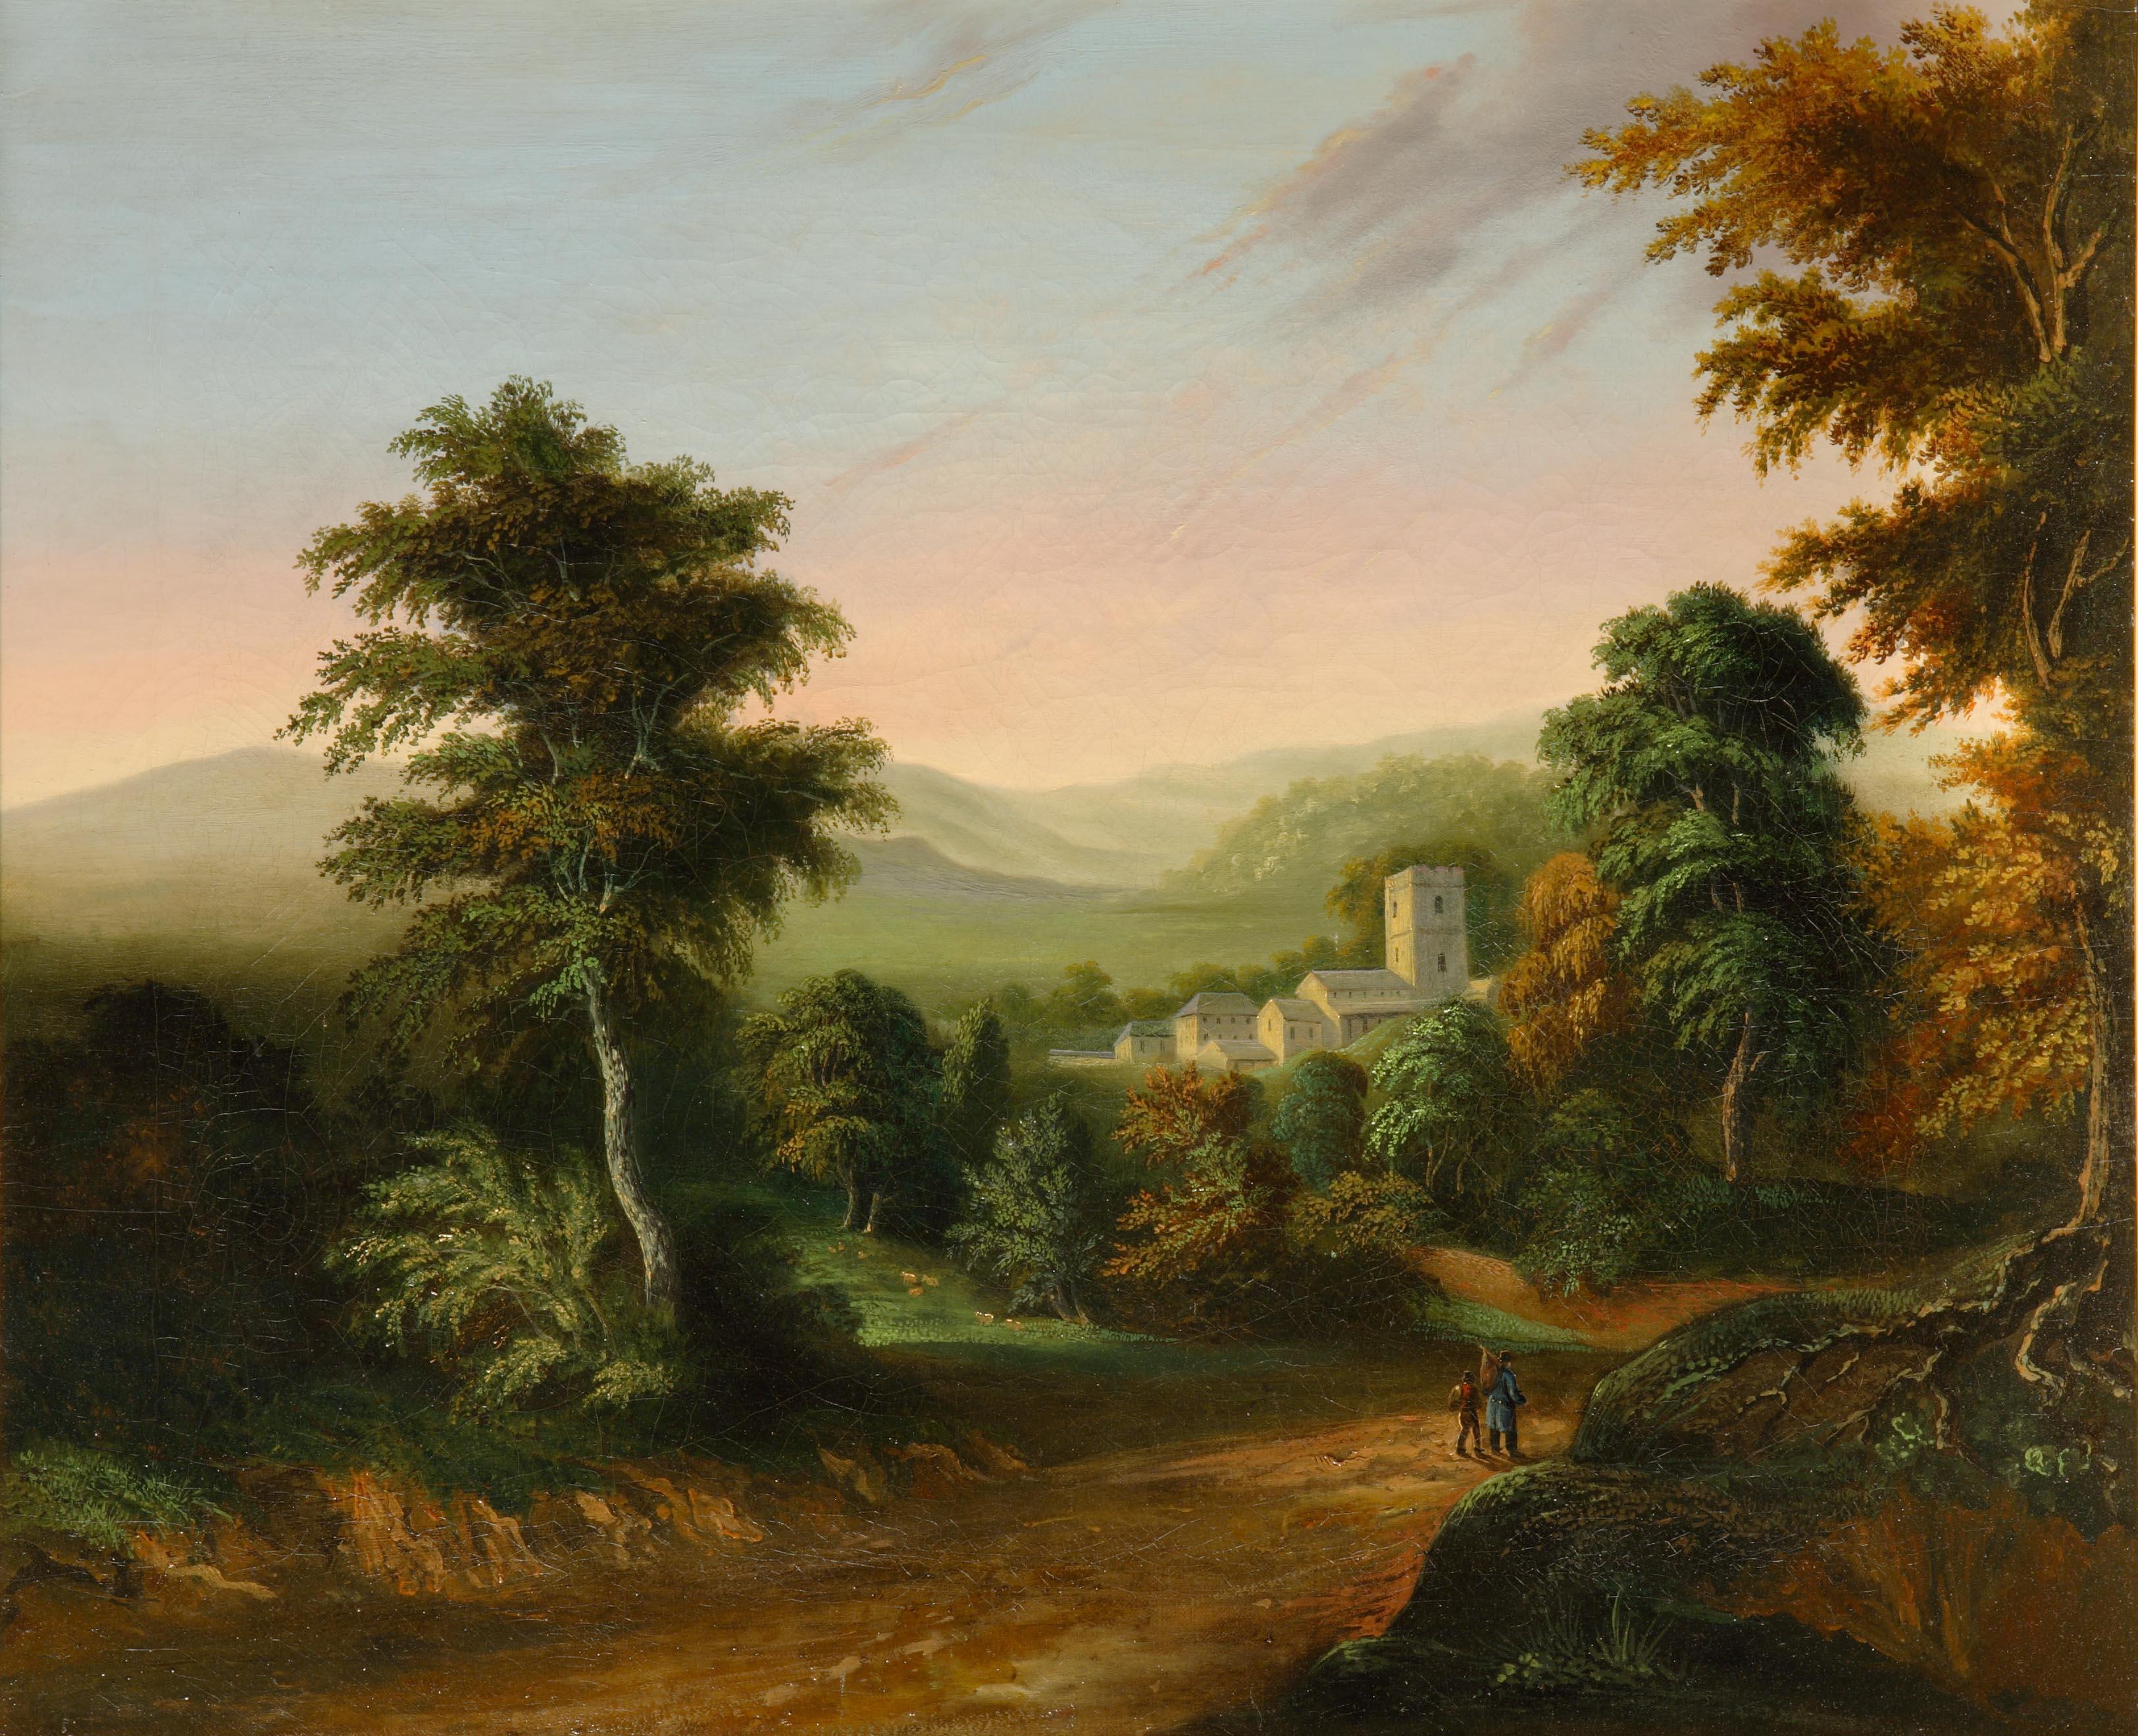 Circle of James Arthur O’Connor, circa 1792-1841

- From or inspired by the picturesque, middle phase of the artist's career beginning c1820 which is marked by a move away from specific topographic views towards more imaginary, idealised landscapes.